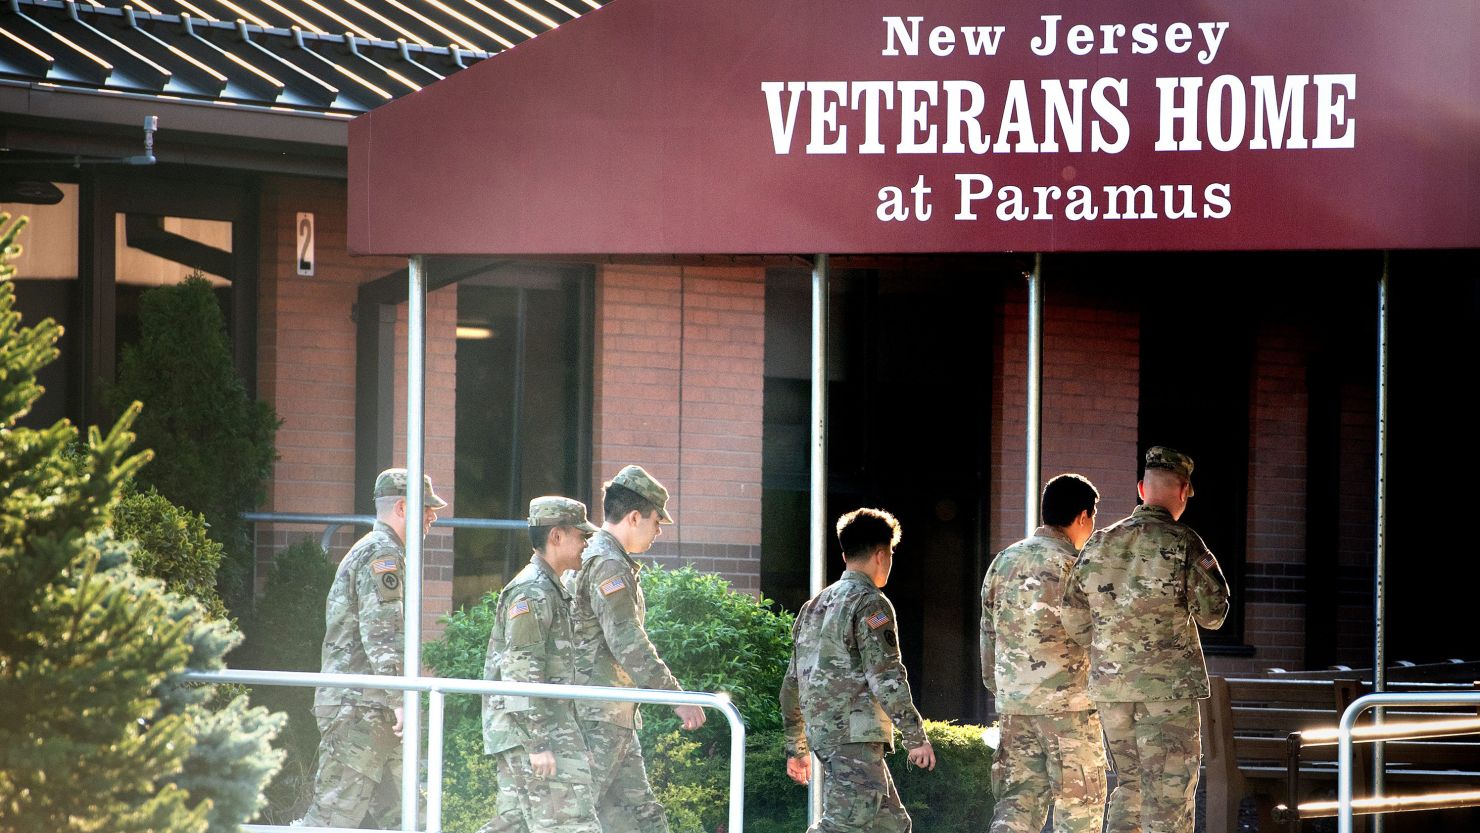 An outbreak of coronavirus disease at the New Jersey Veterans Home in Paramus killed at least 146 residents by July 2020, according to a government report.